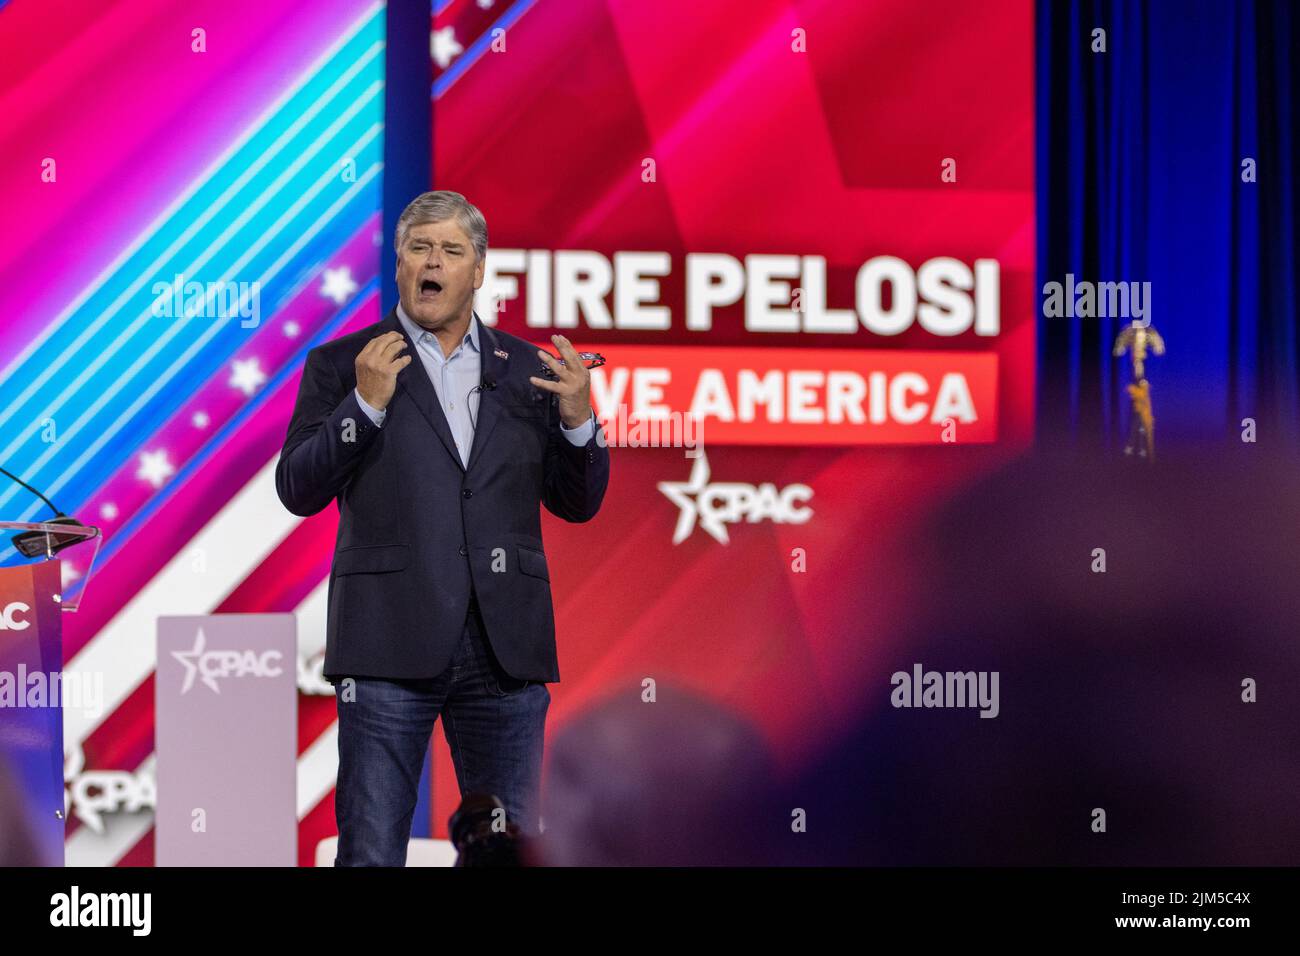 Dallas, USA. 04 Aug 2022. Sean Hannity delivers remarks at the Conservative Political Action Conference. Credit: Valerio Pucci / Alamy Stock Photo